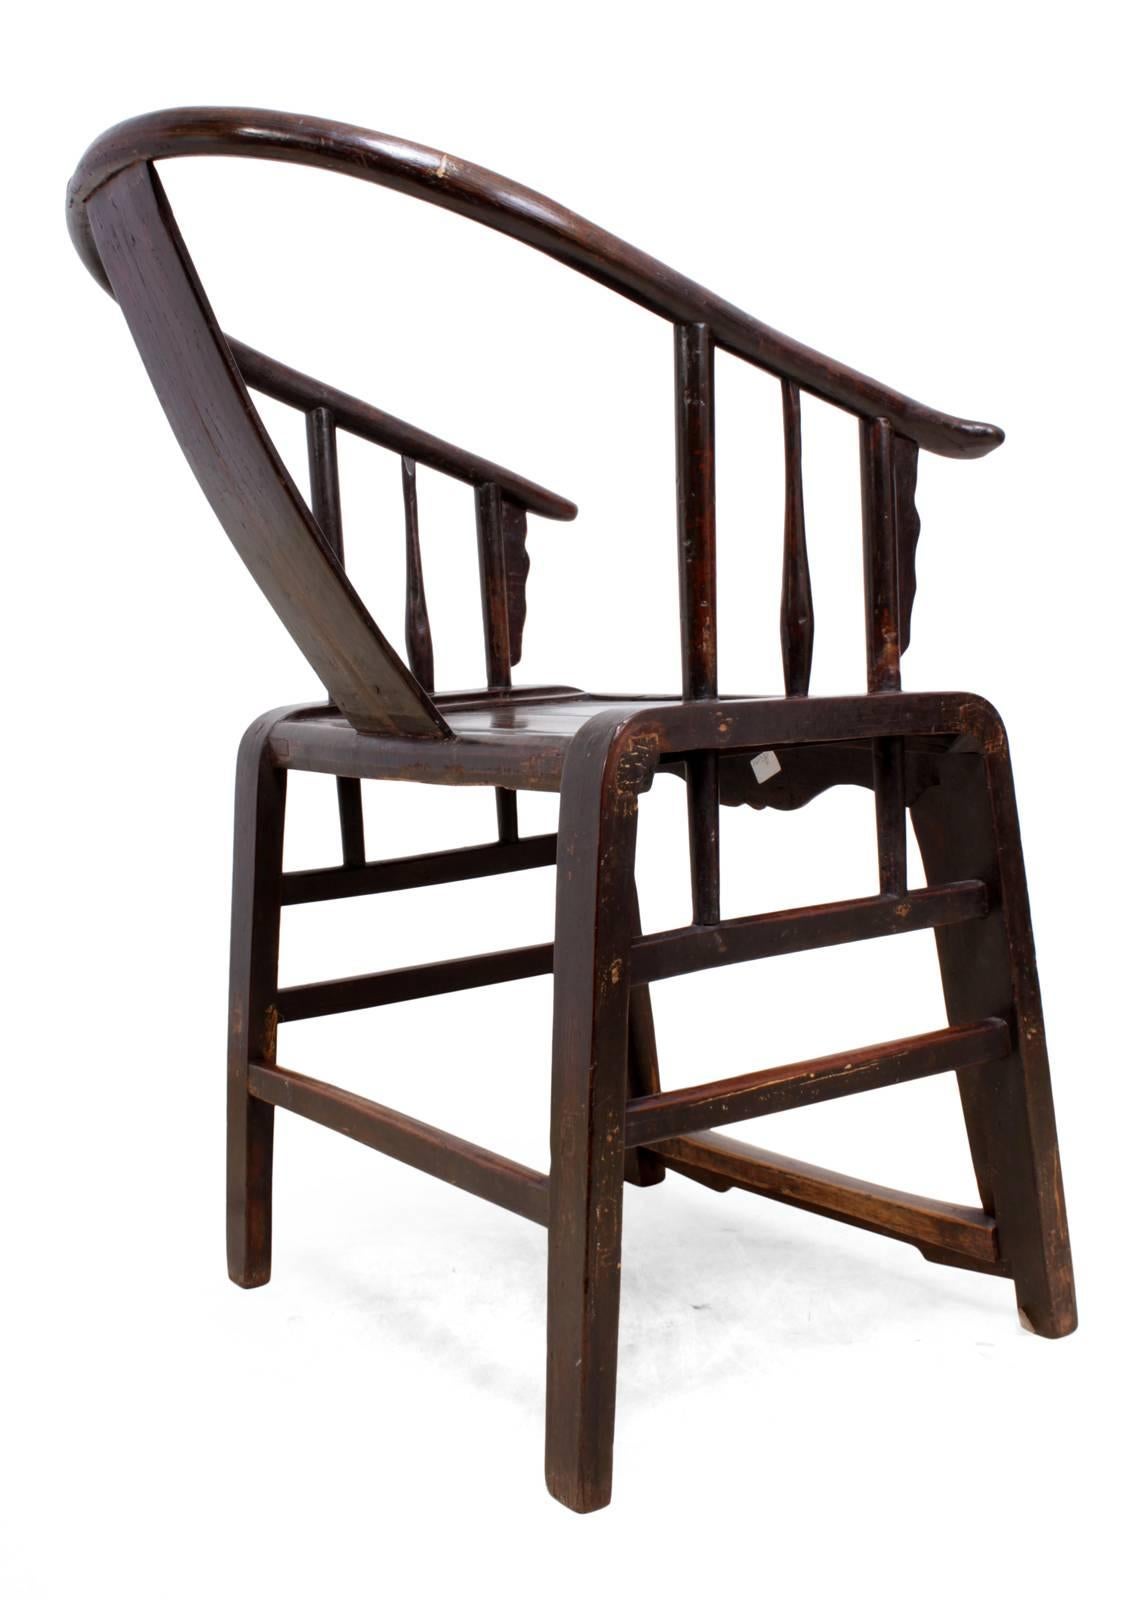 Chinese Elm 19th Century Horseshoe Chair In Excellent Condition For Sale In Paddock Wood, Kent